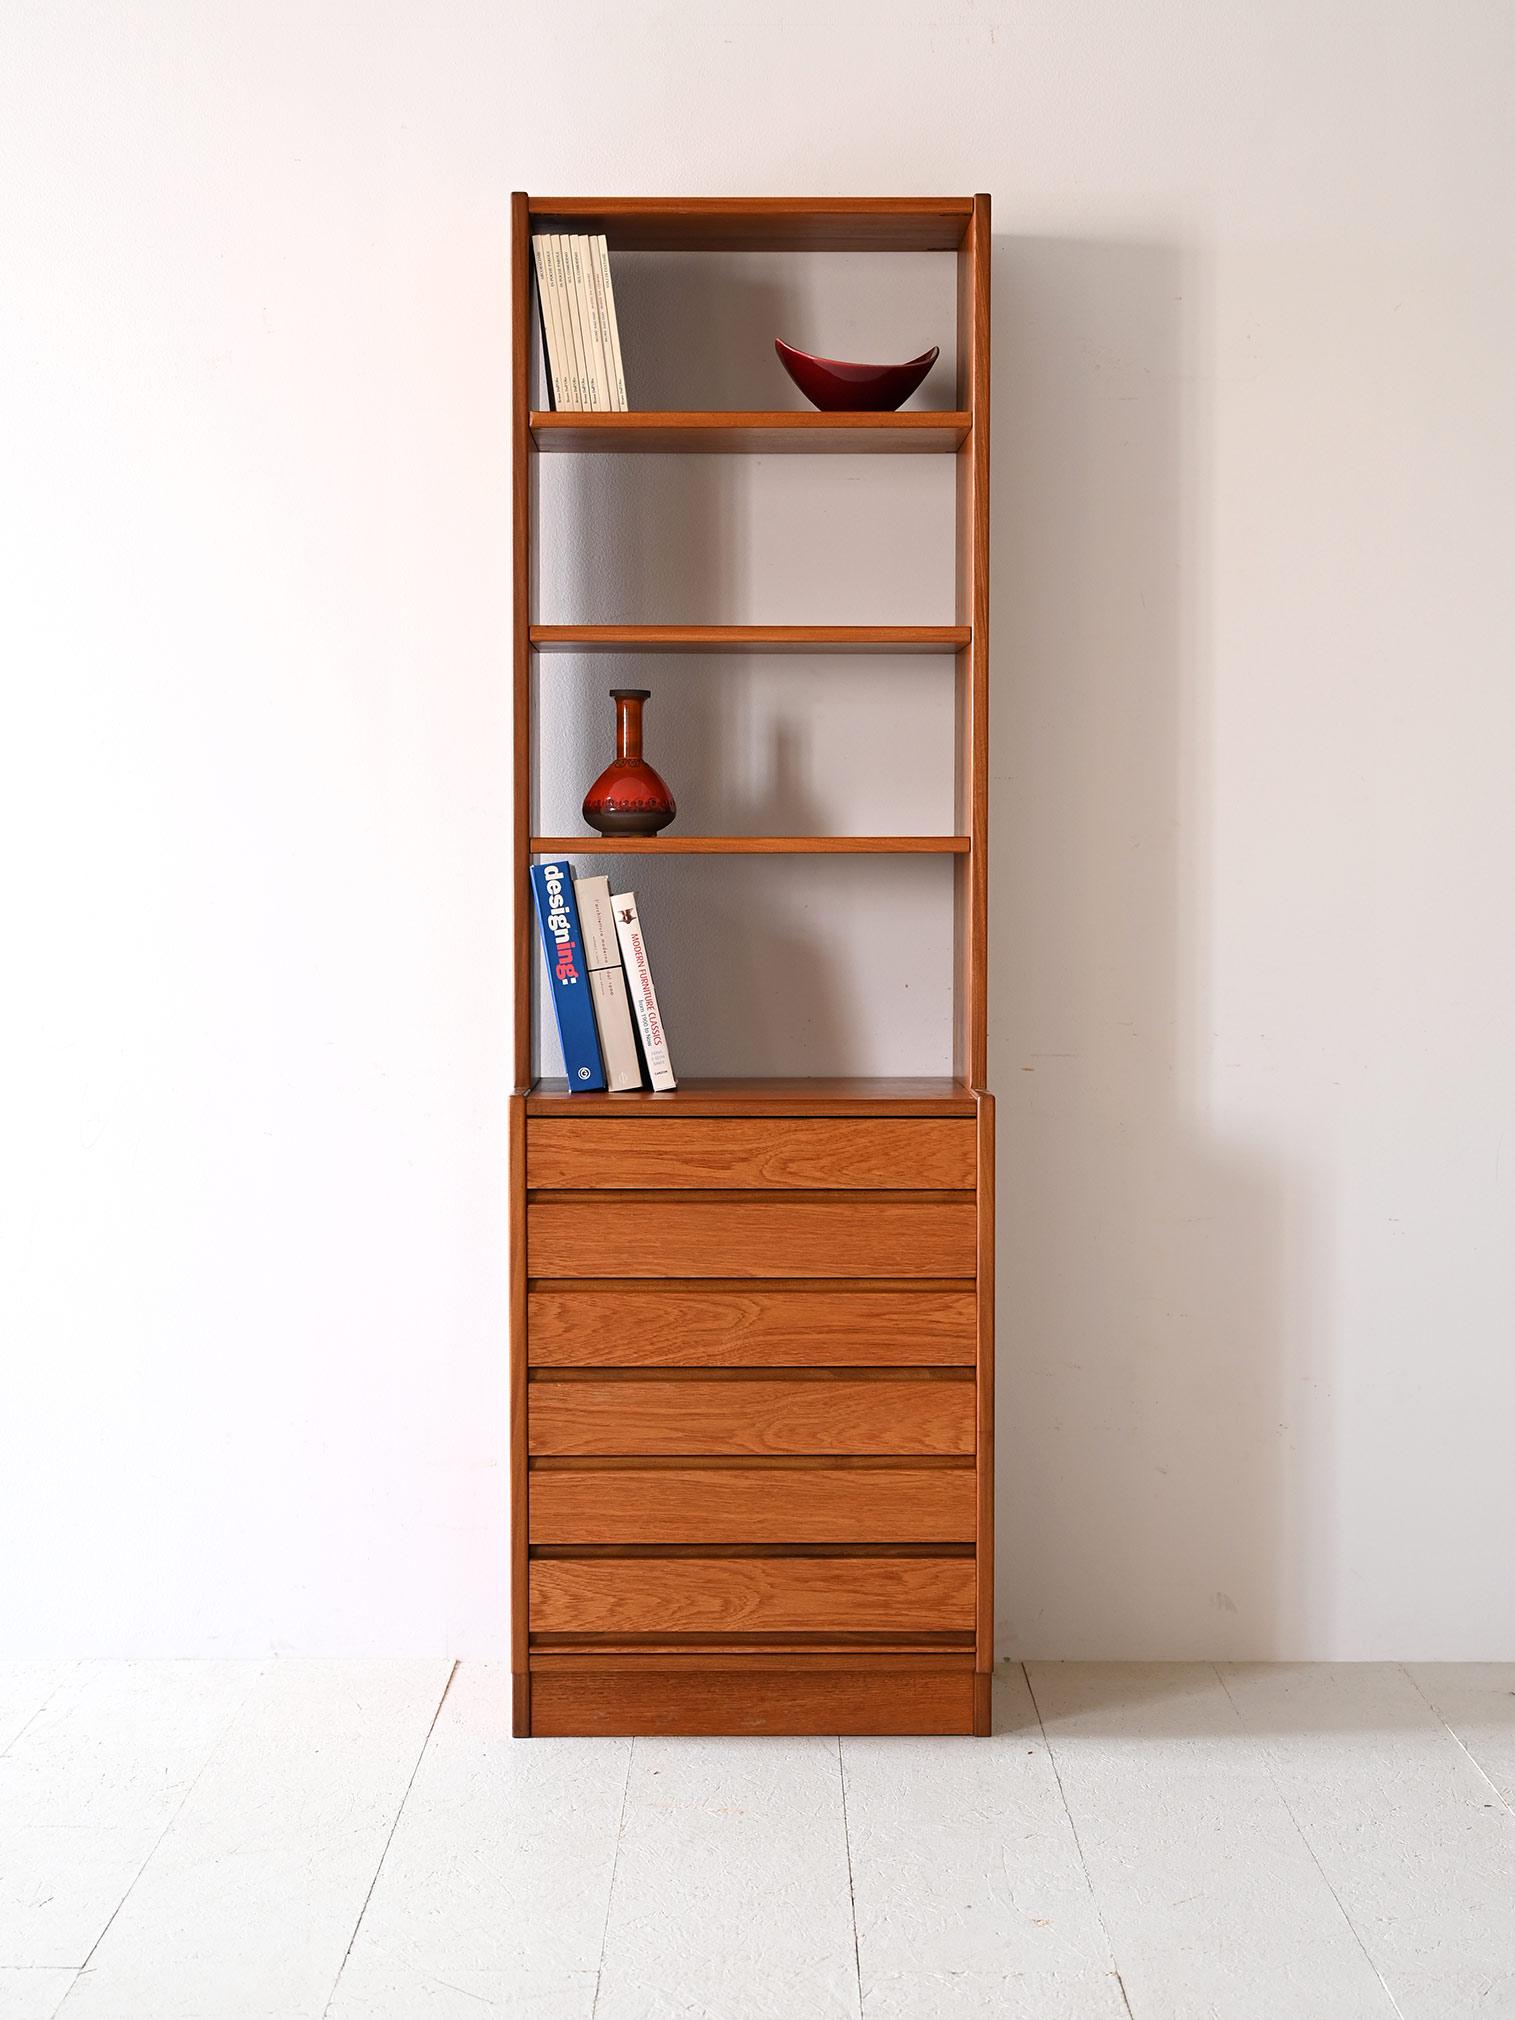 Vintage Scandinavian chest of drawers with shelving.

Featuring six drawers that provide ample space to carefully organize personal items, it has open shelves that invite the arrangement of books and art objects. The teak finish, with its expressive